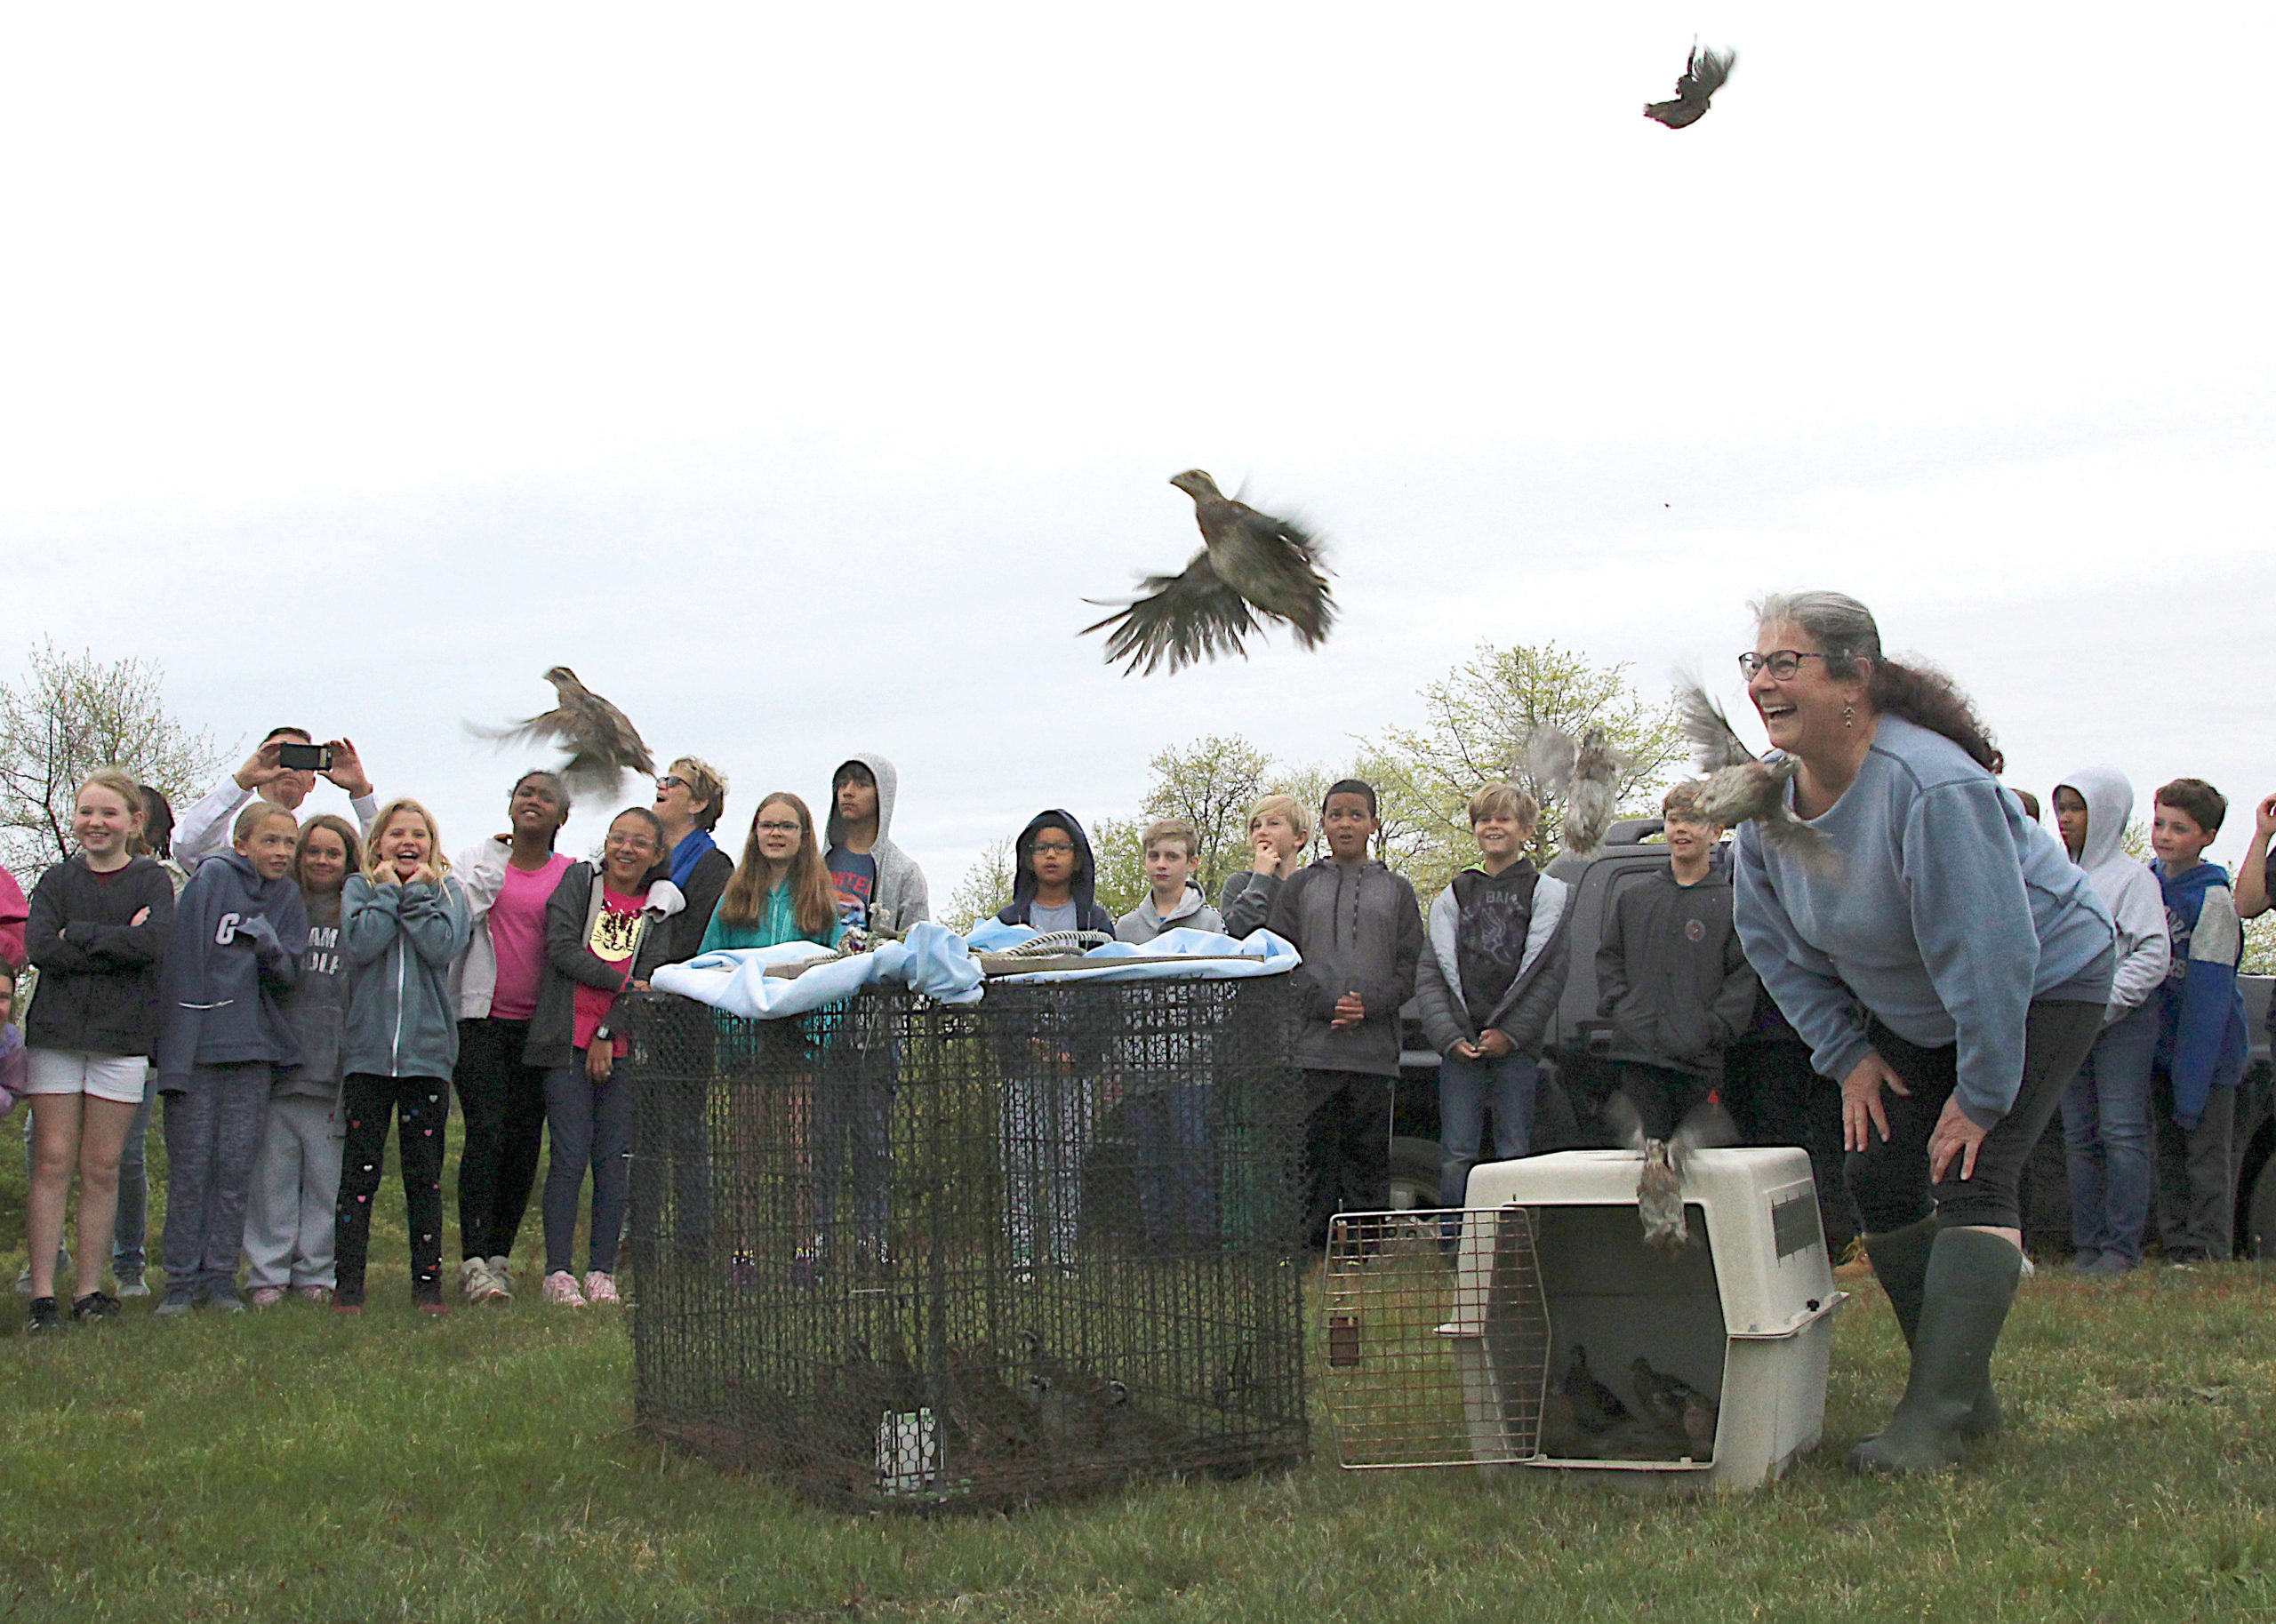 Fly Forth, Young Quail! 
May 29 -- Third House Nature Center hosted its first bobwhite quail release of the year in partnership with Montauk School science students.